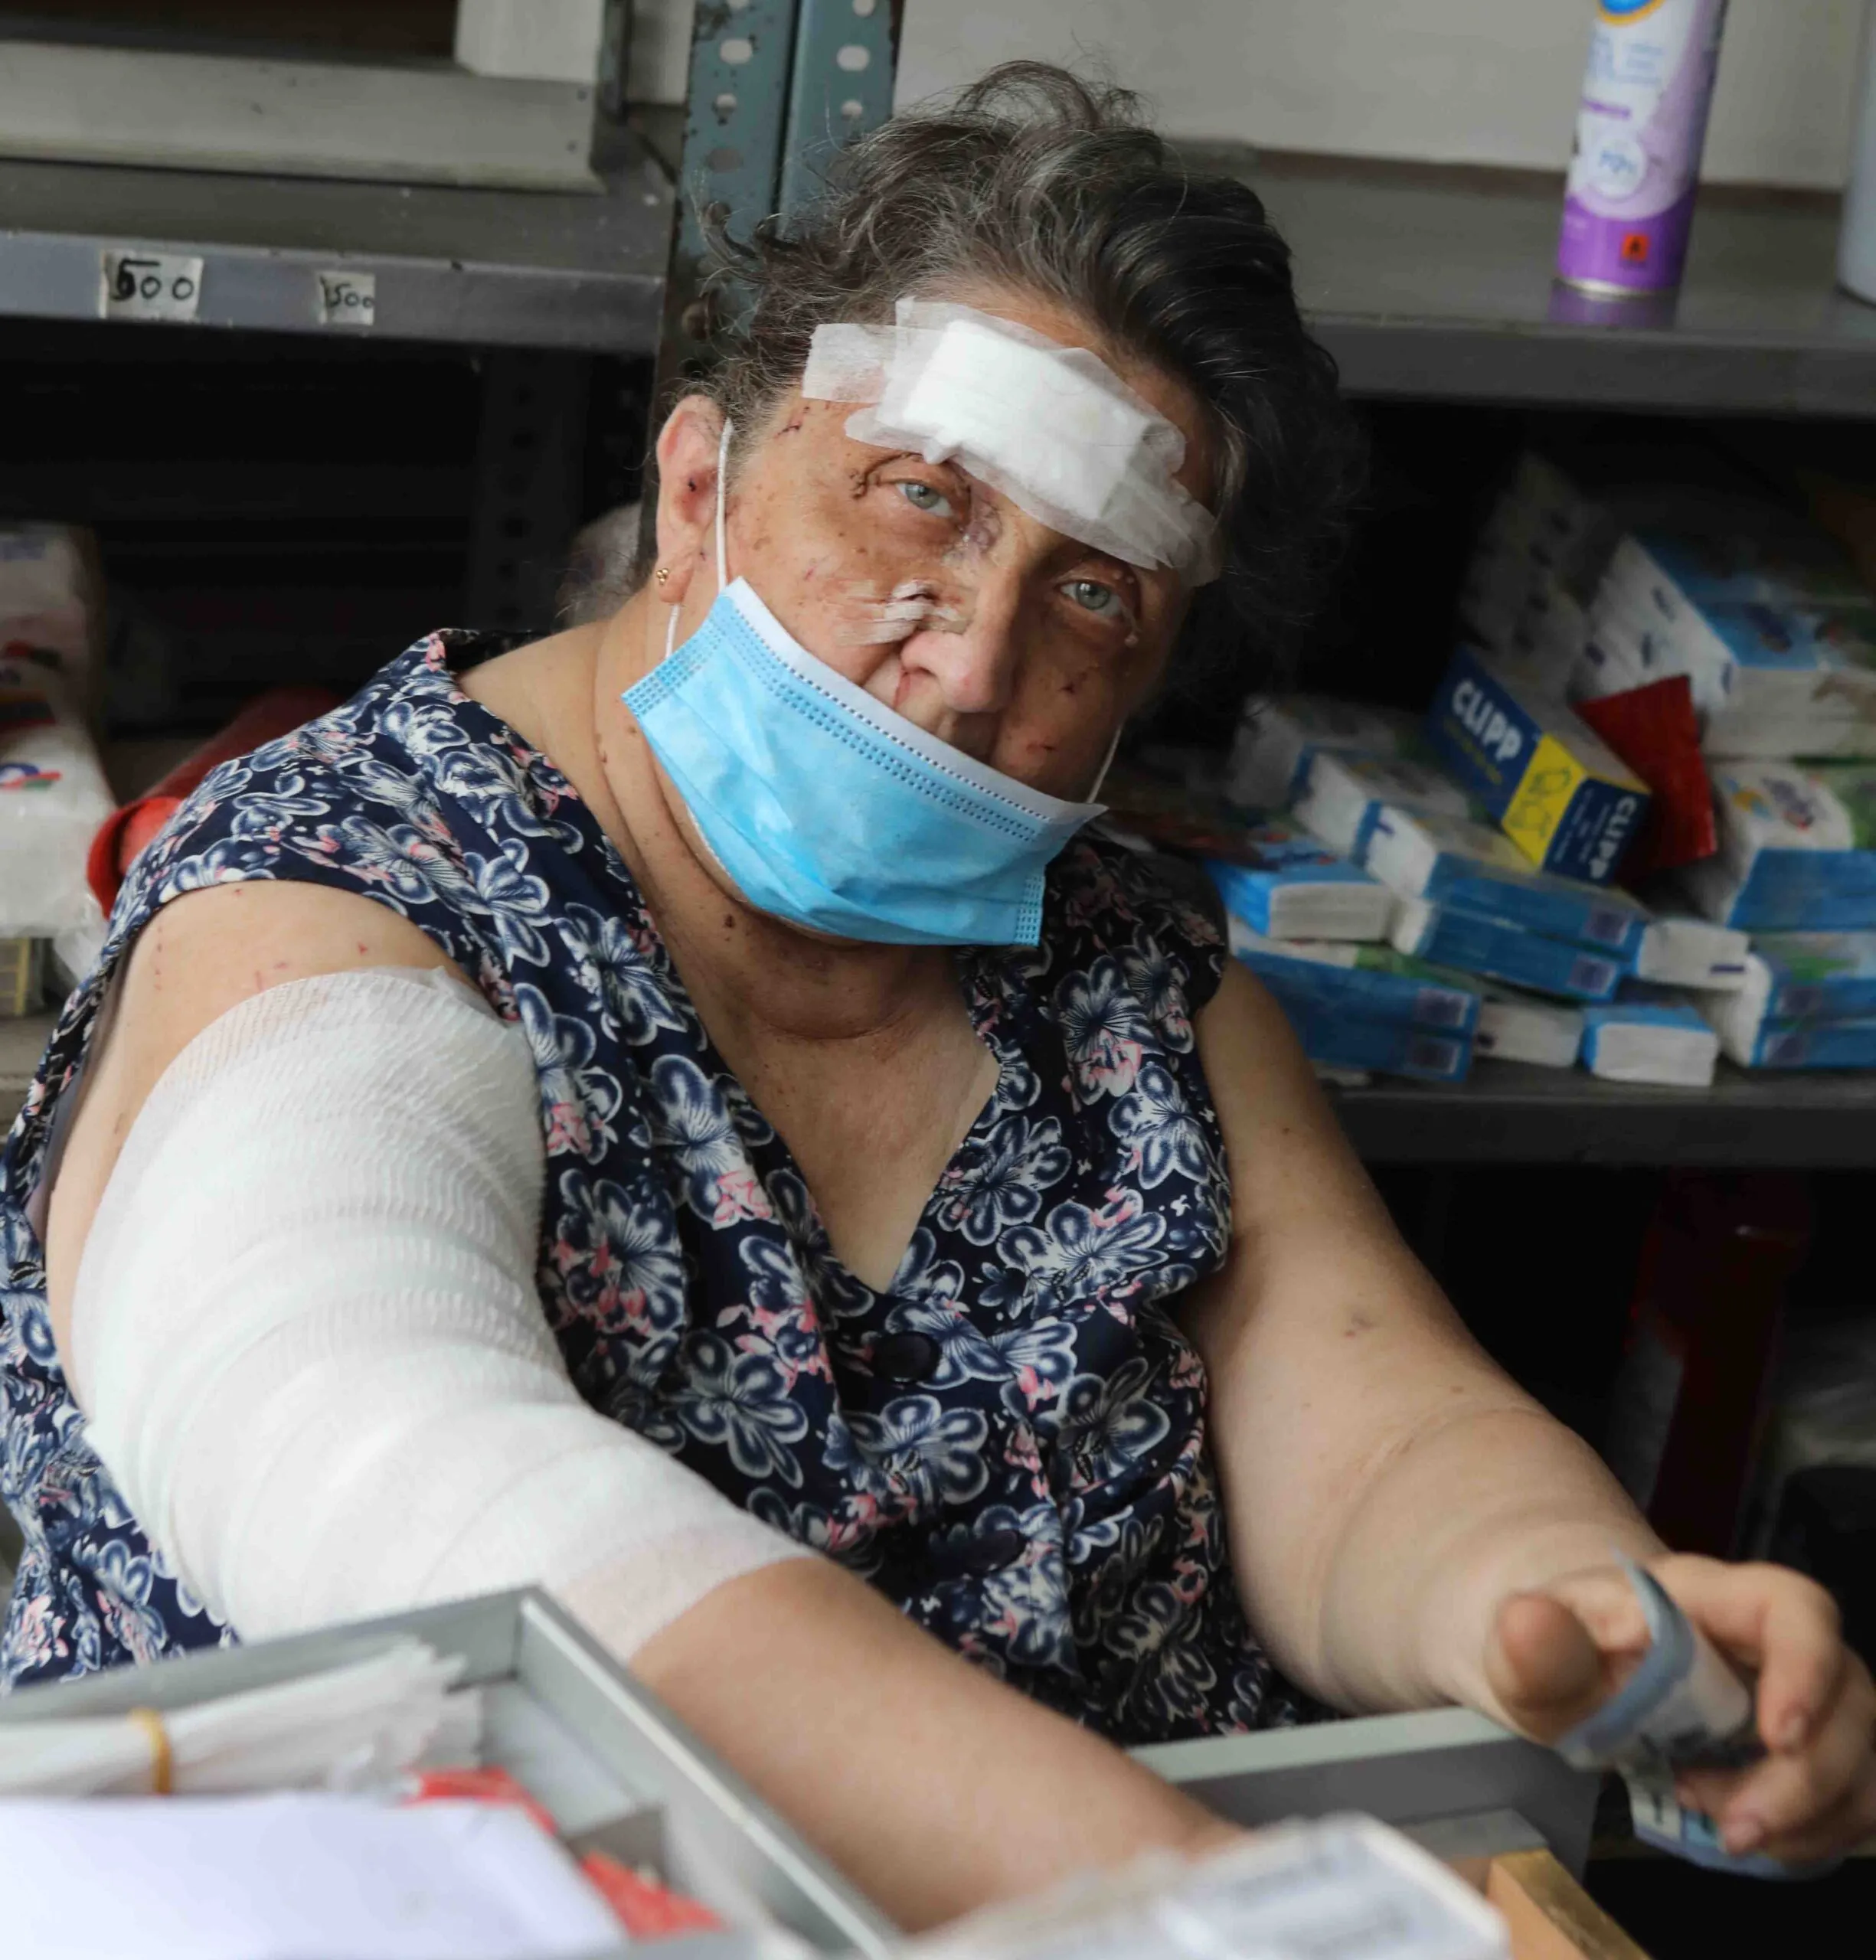 An elderly injured Lebanese woman with bandages on her head and right arm looks directly ahead.